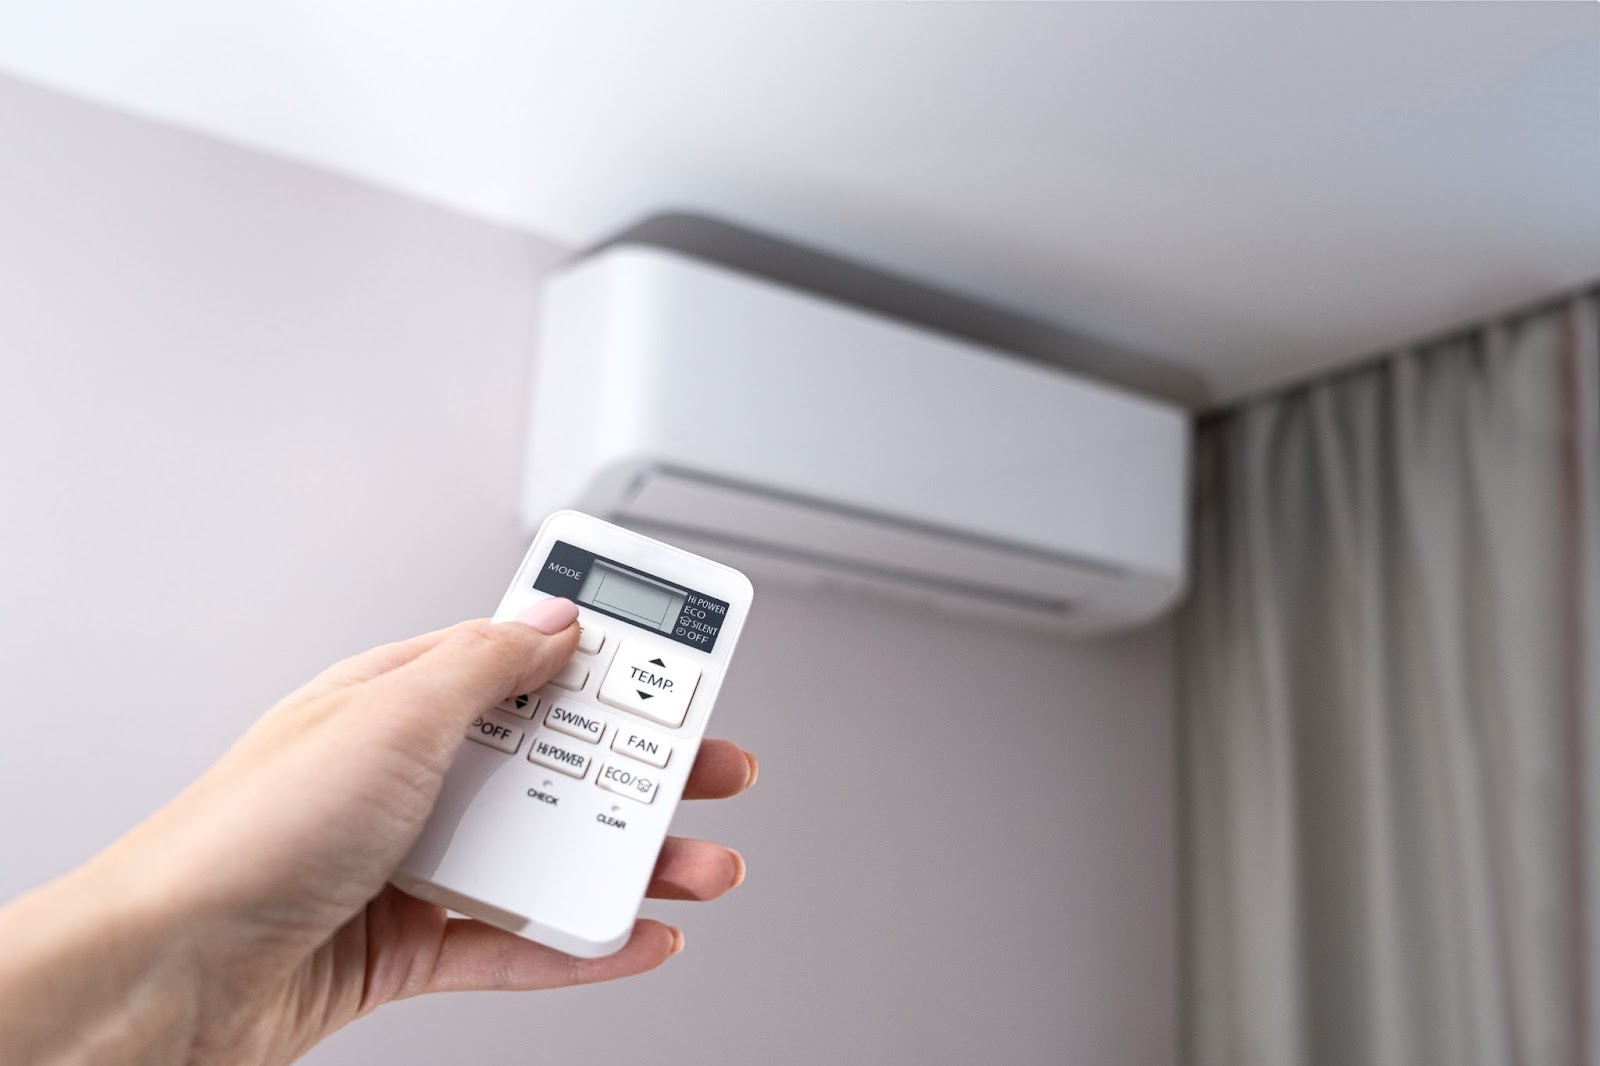 A hand is shown using a remote control to adjust the temperature settings of a ductless AC unit.